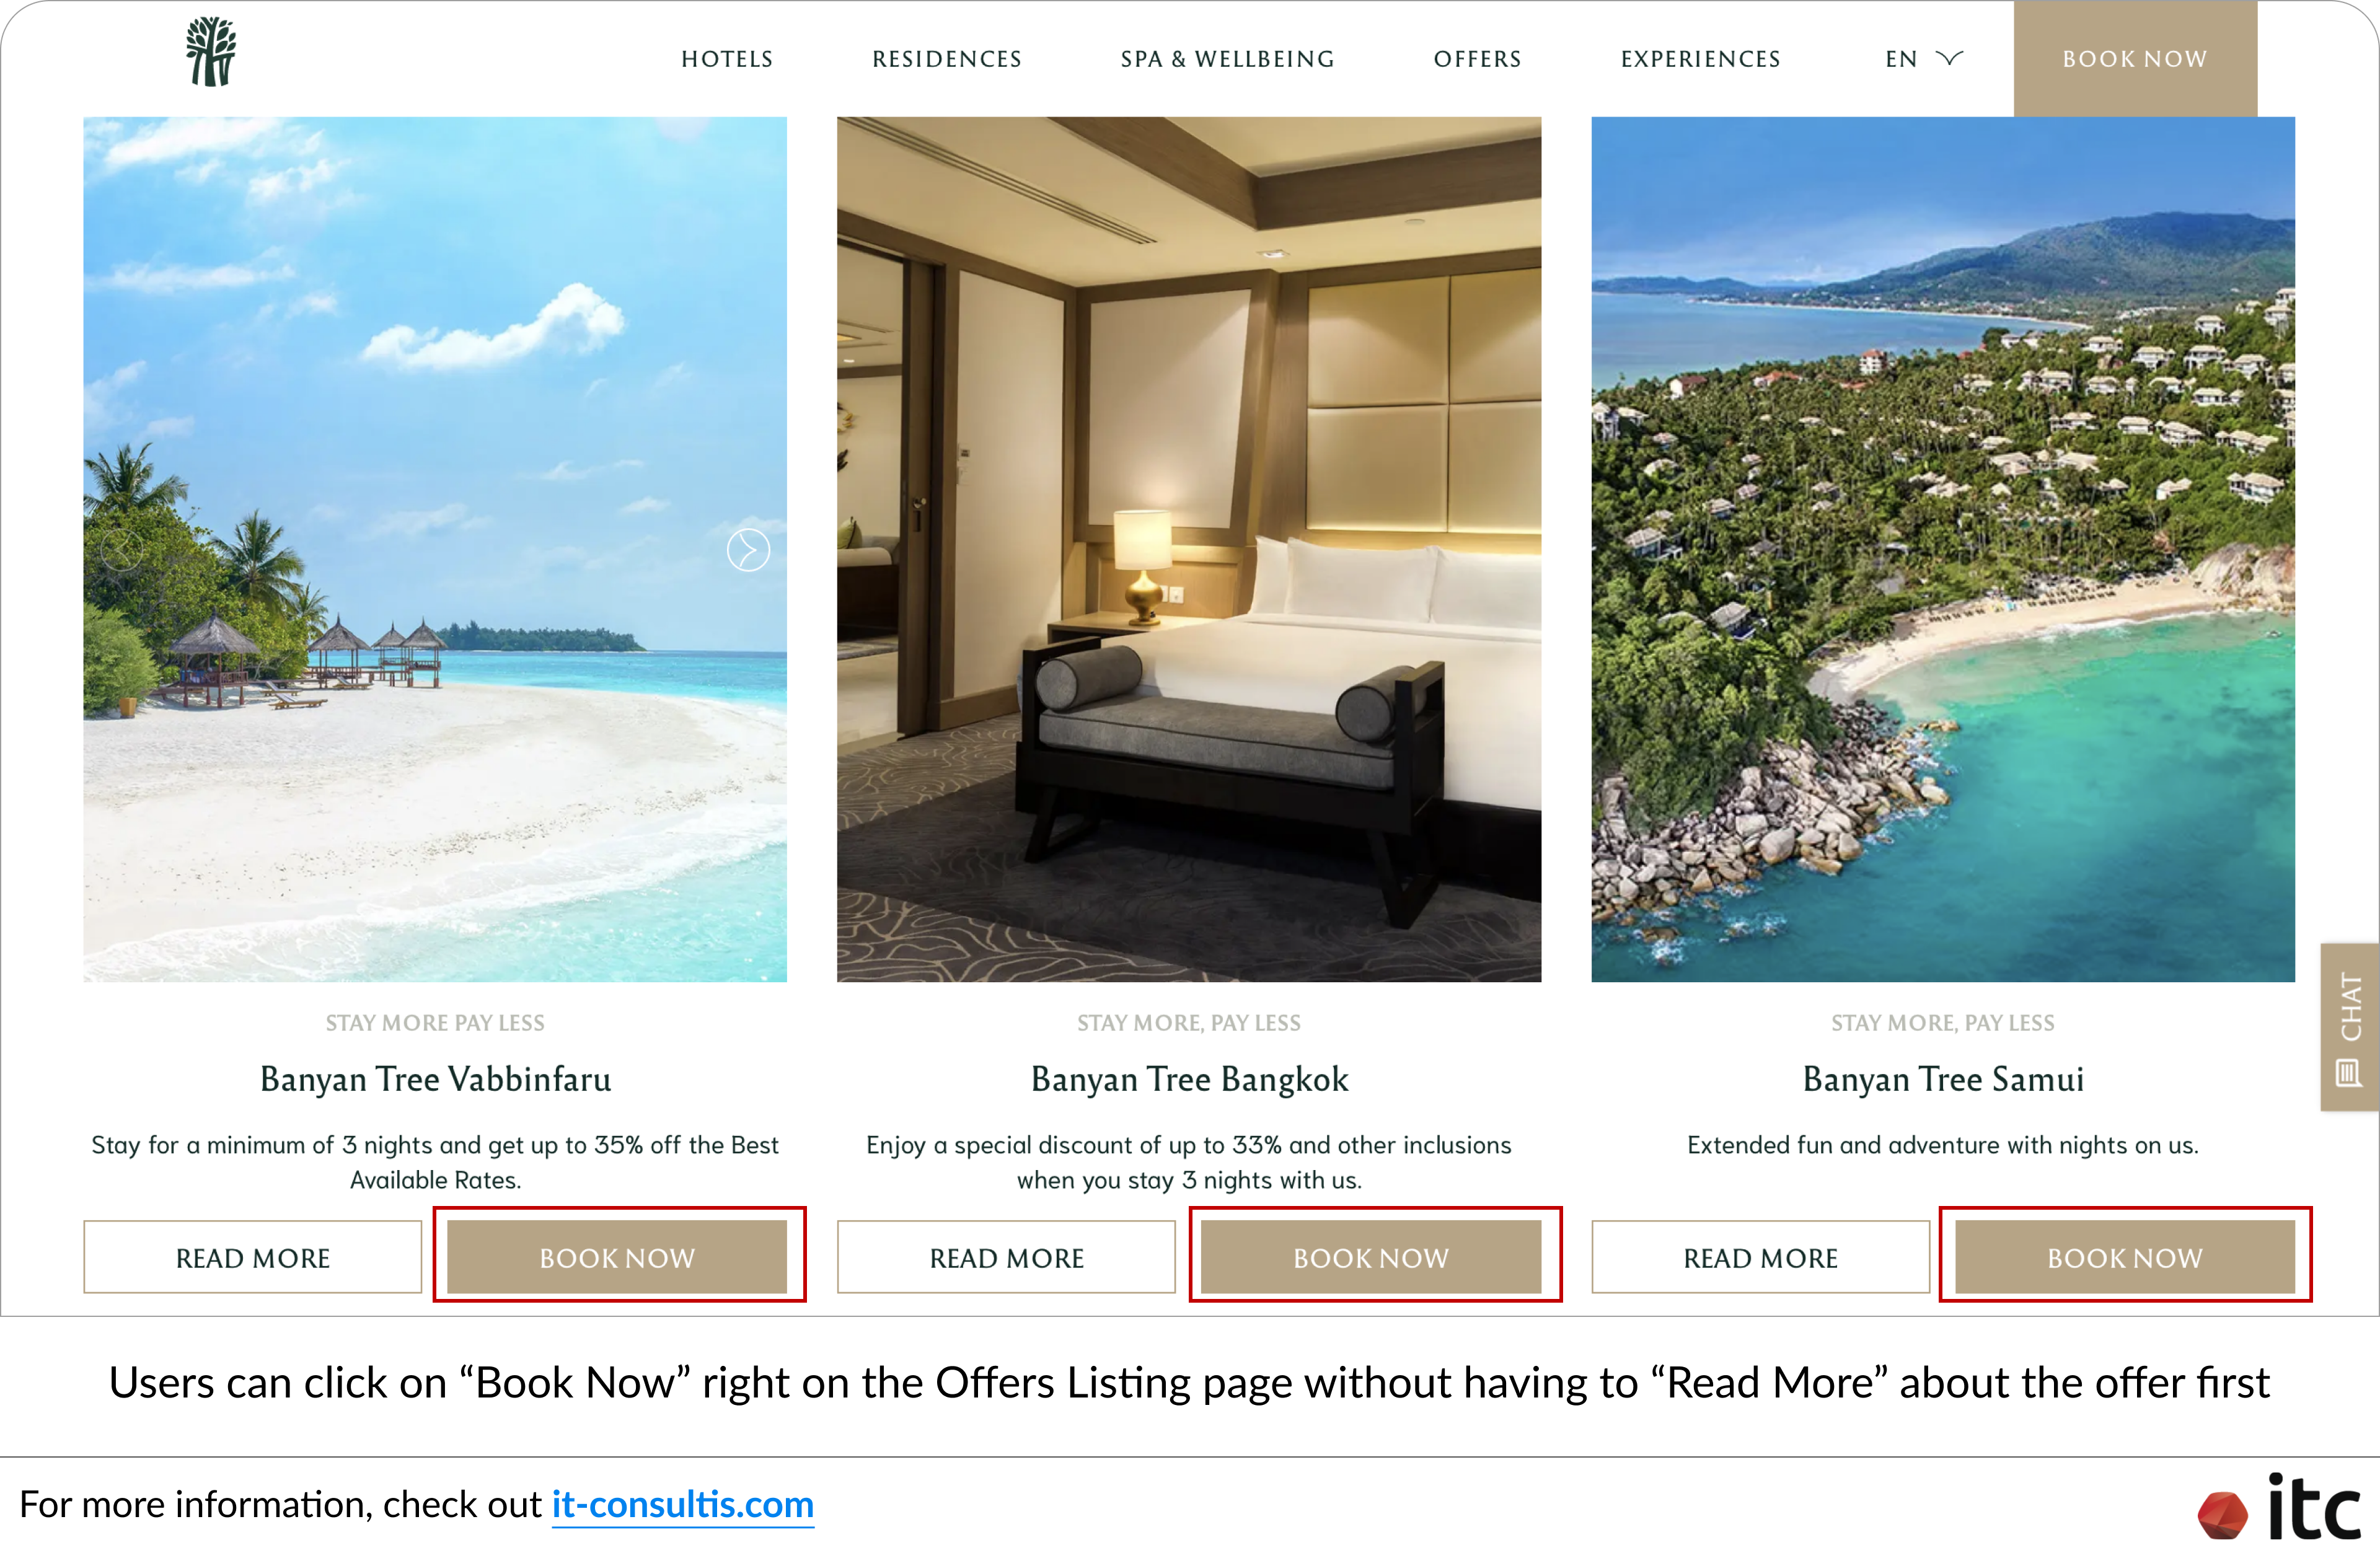 Users can click on "Book Now" right on the Offers Listing page without having to "Read More" about the offer first